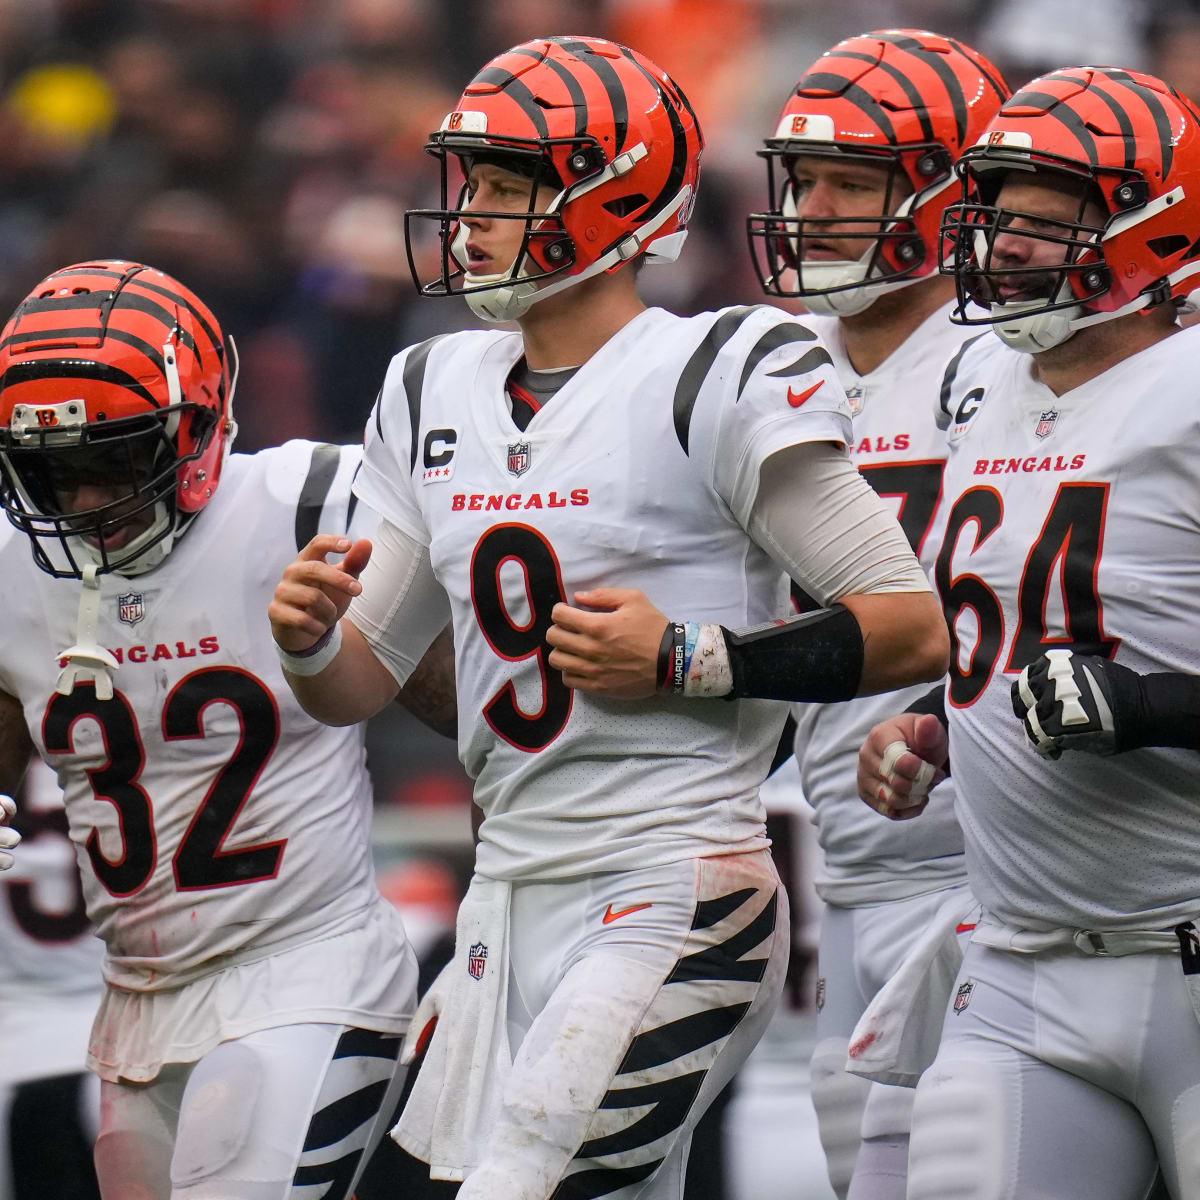 when do the bengals play monday night football